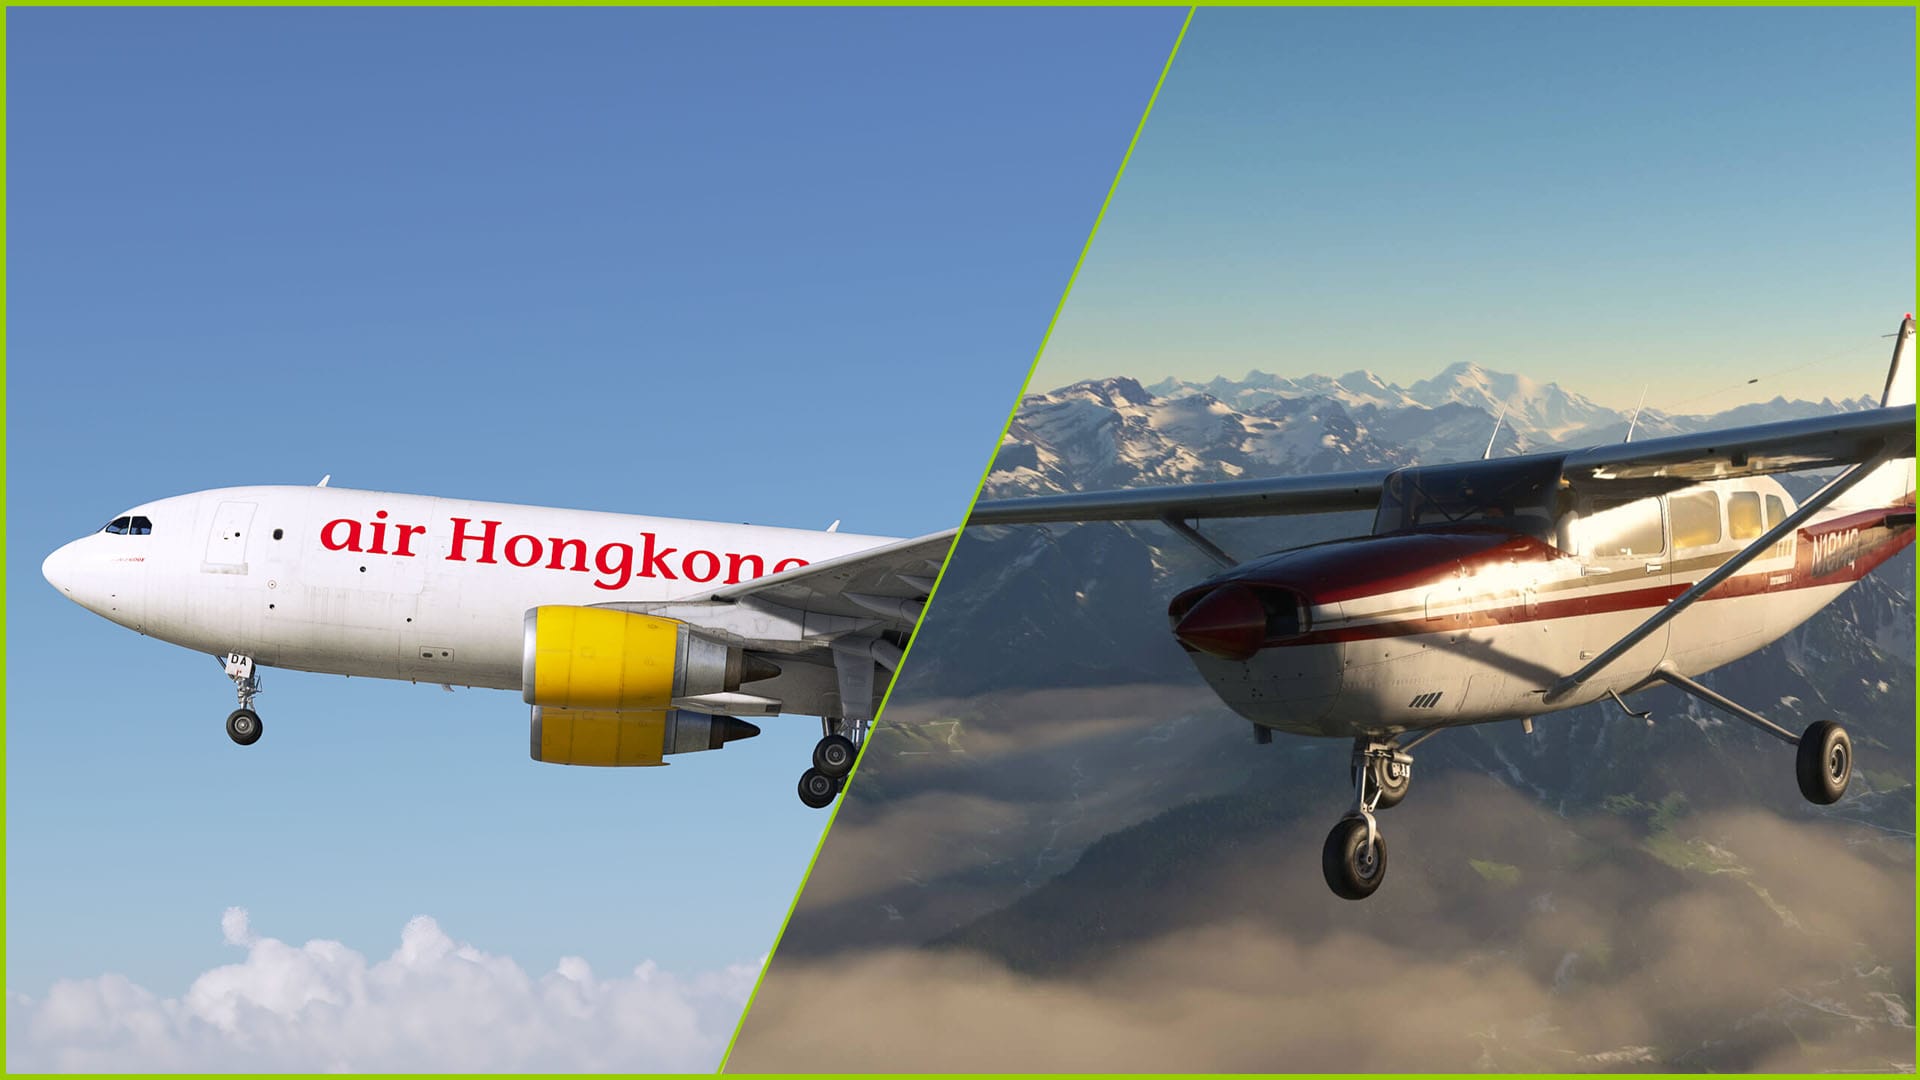 Microsoft Flight Simulator Airbus A300 Coming Soon, Cessna T207A and Free City Update 5 Released